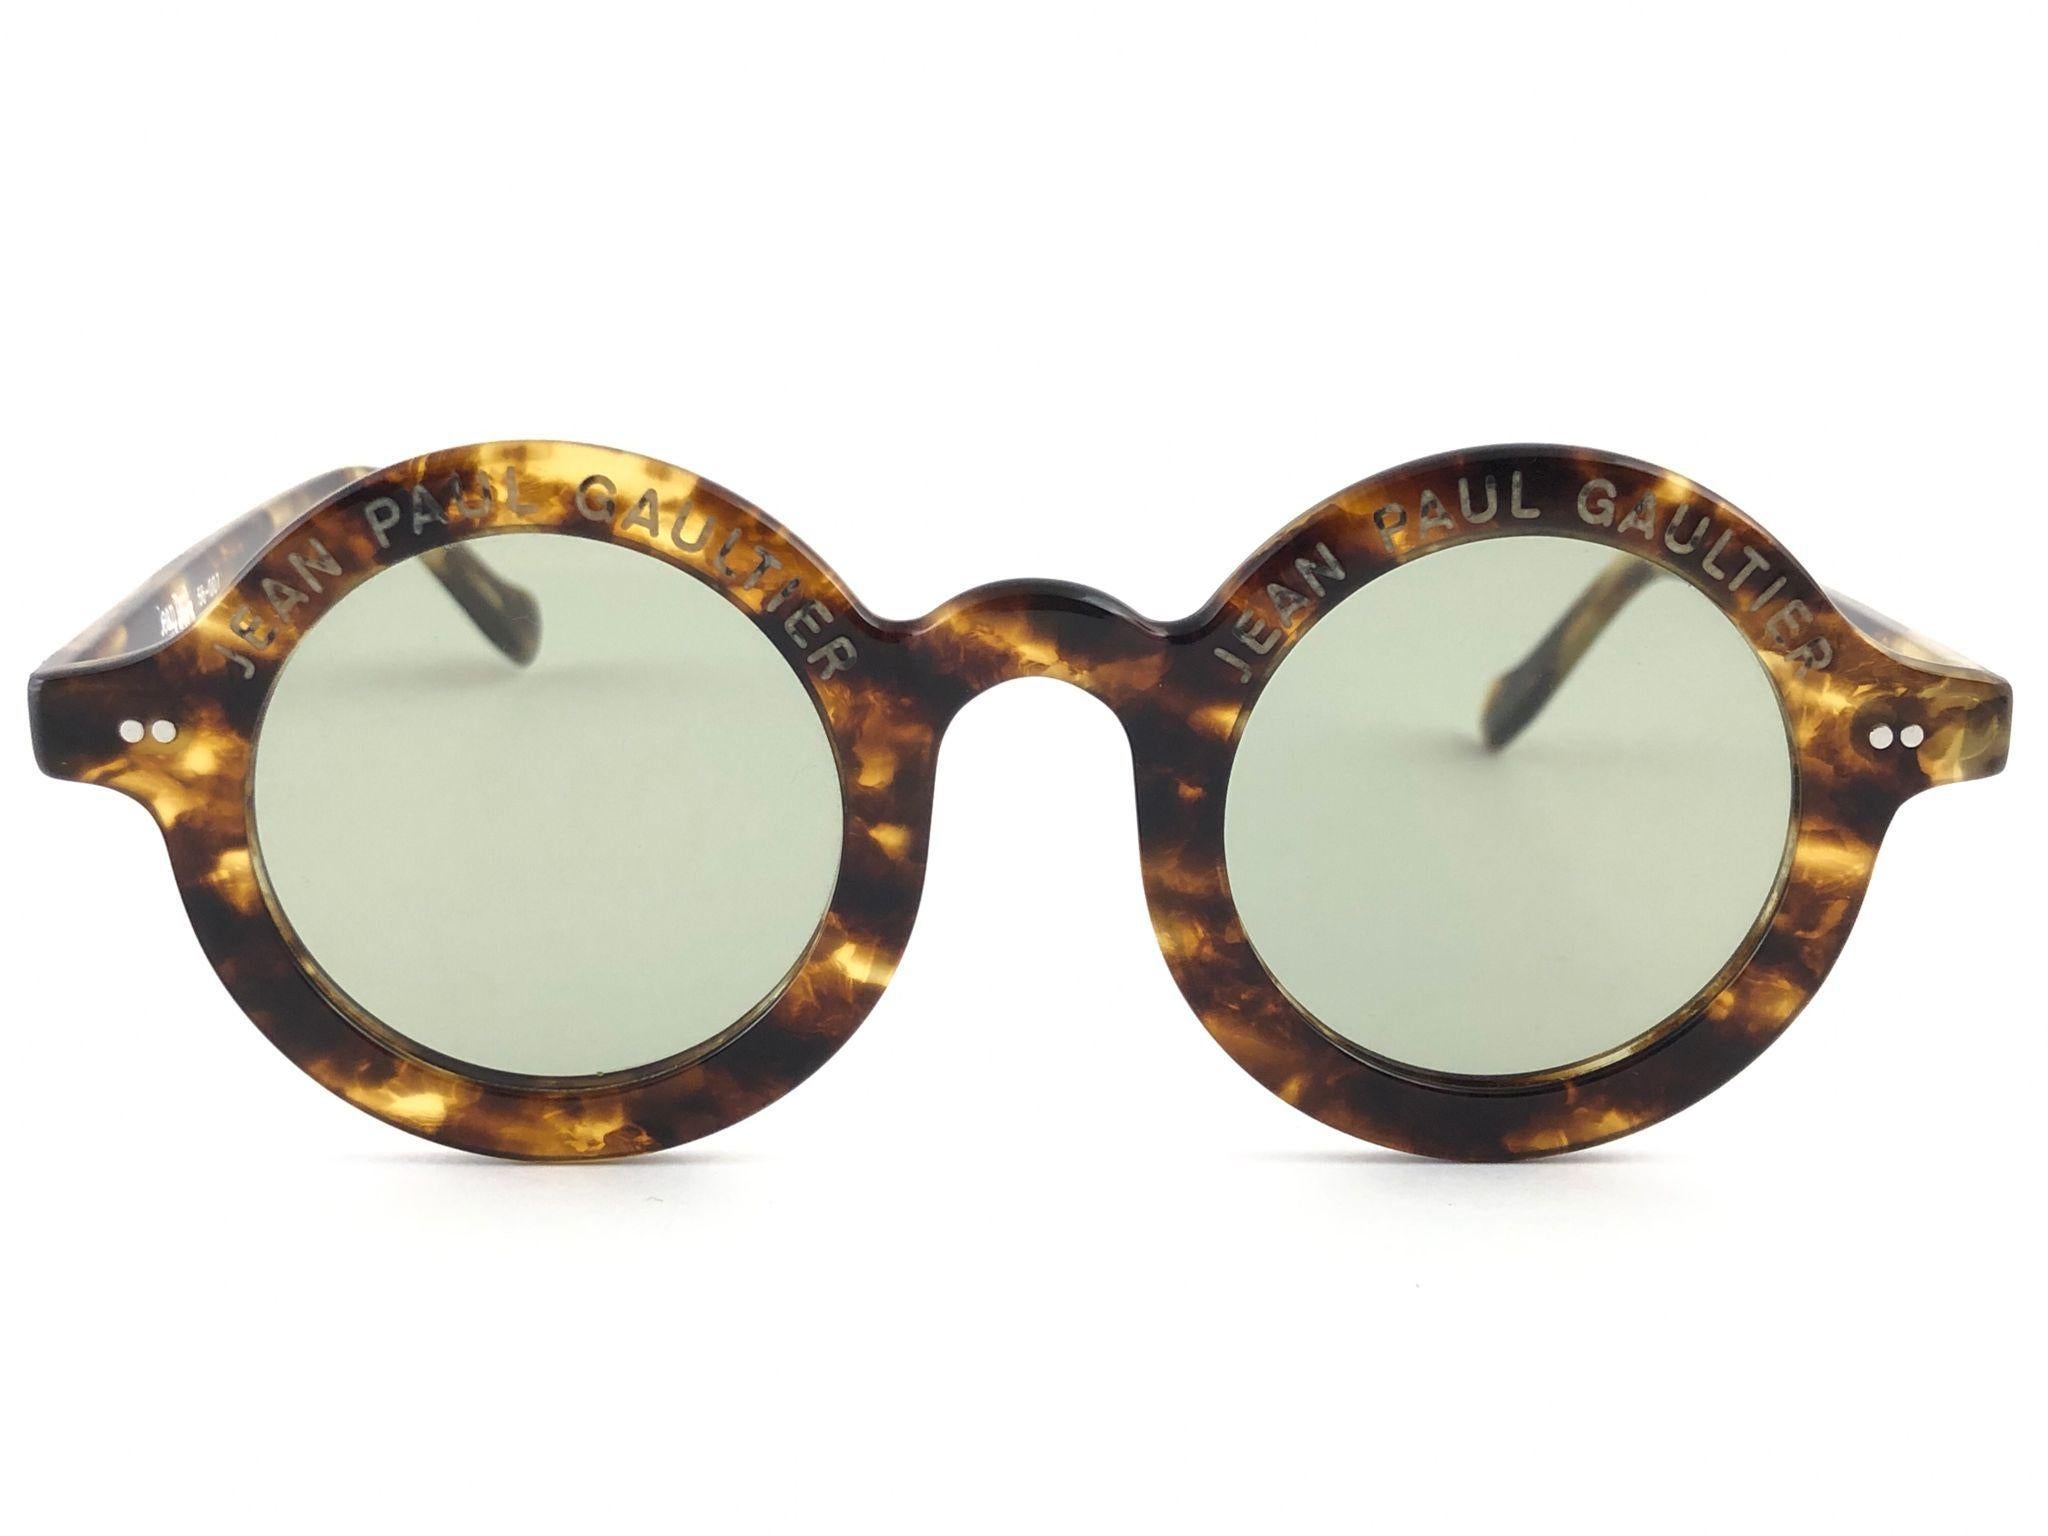 
New Jean Paul Gaultier 56 0071 Iconic round tortoise frame. 
Flat grey lenses that complete a ready to wear JPG look.
Amazing quality and design. A piece of sunglasses history.
This pair has minor sign of wear due to nearly 30 years of storage.